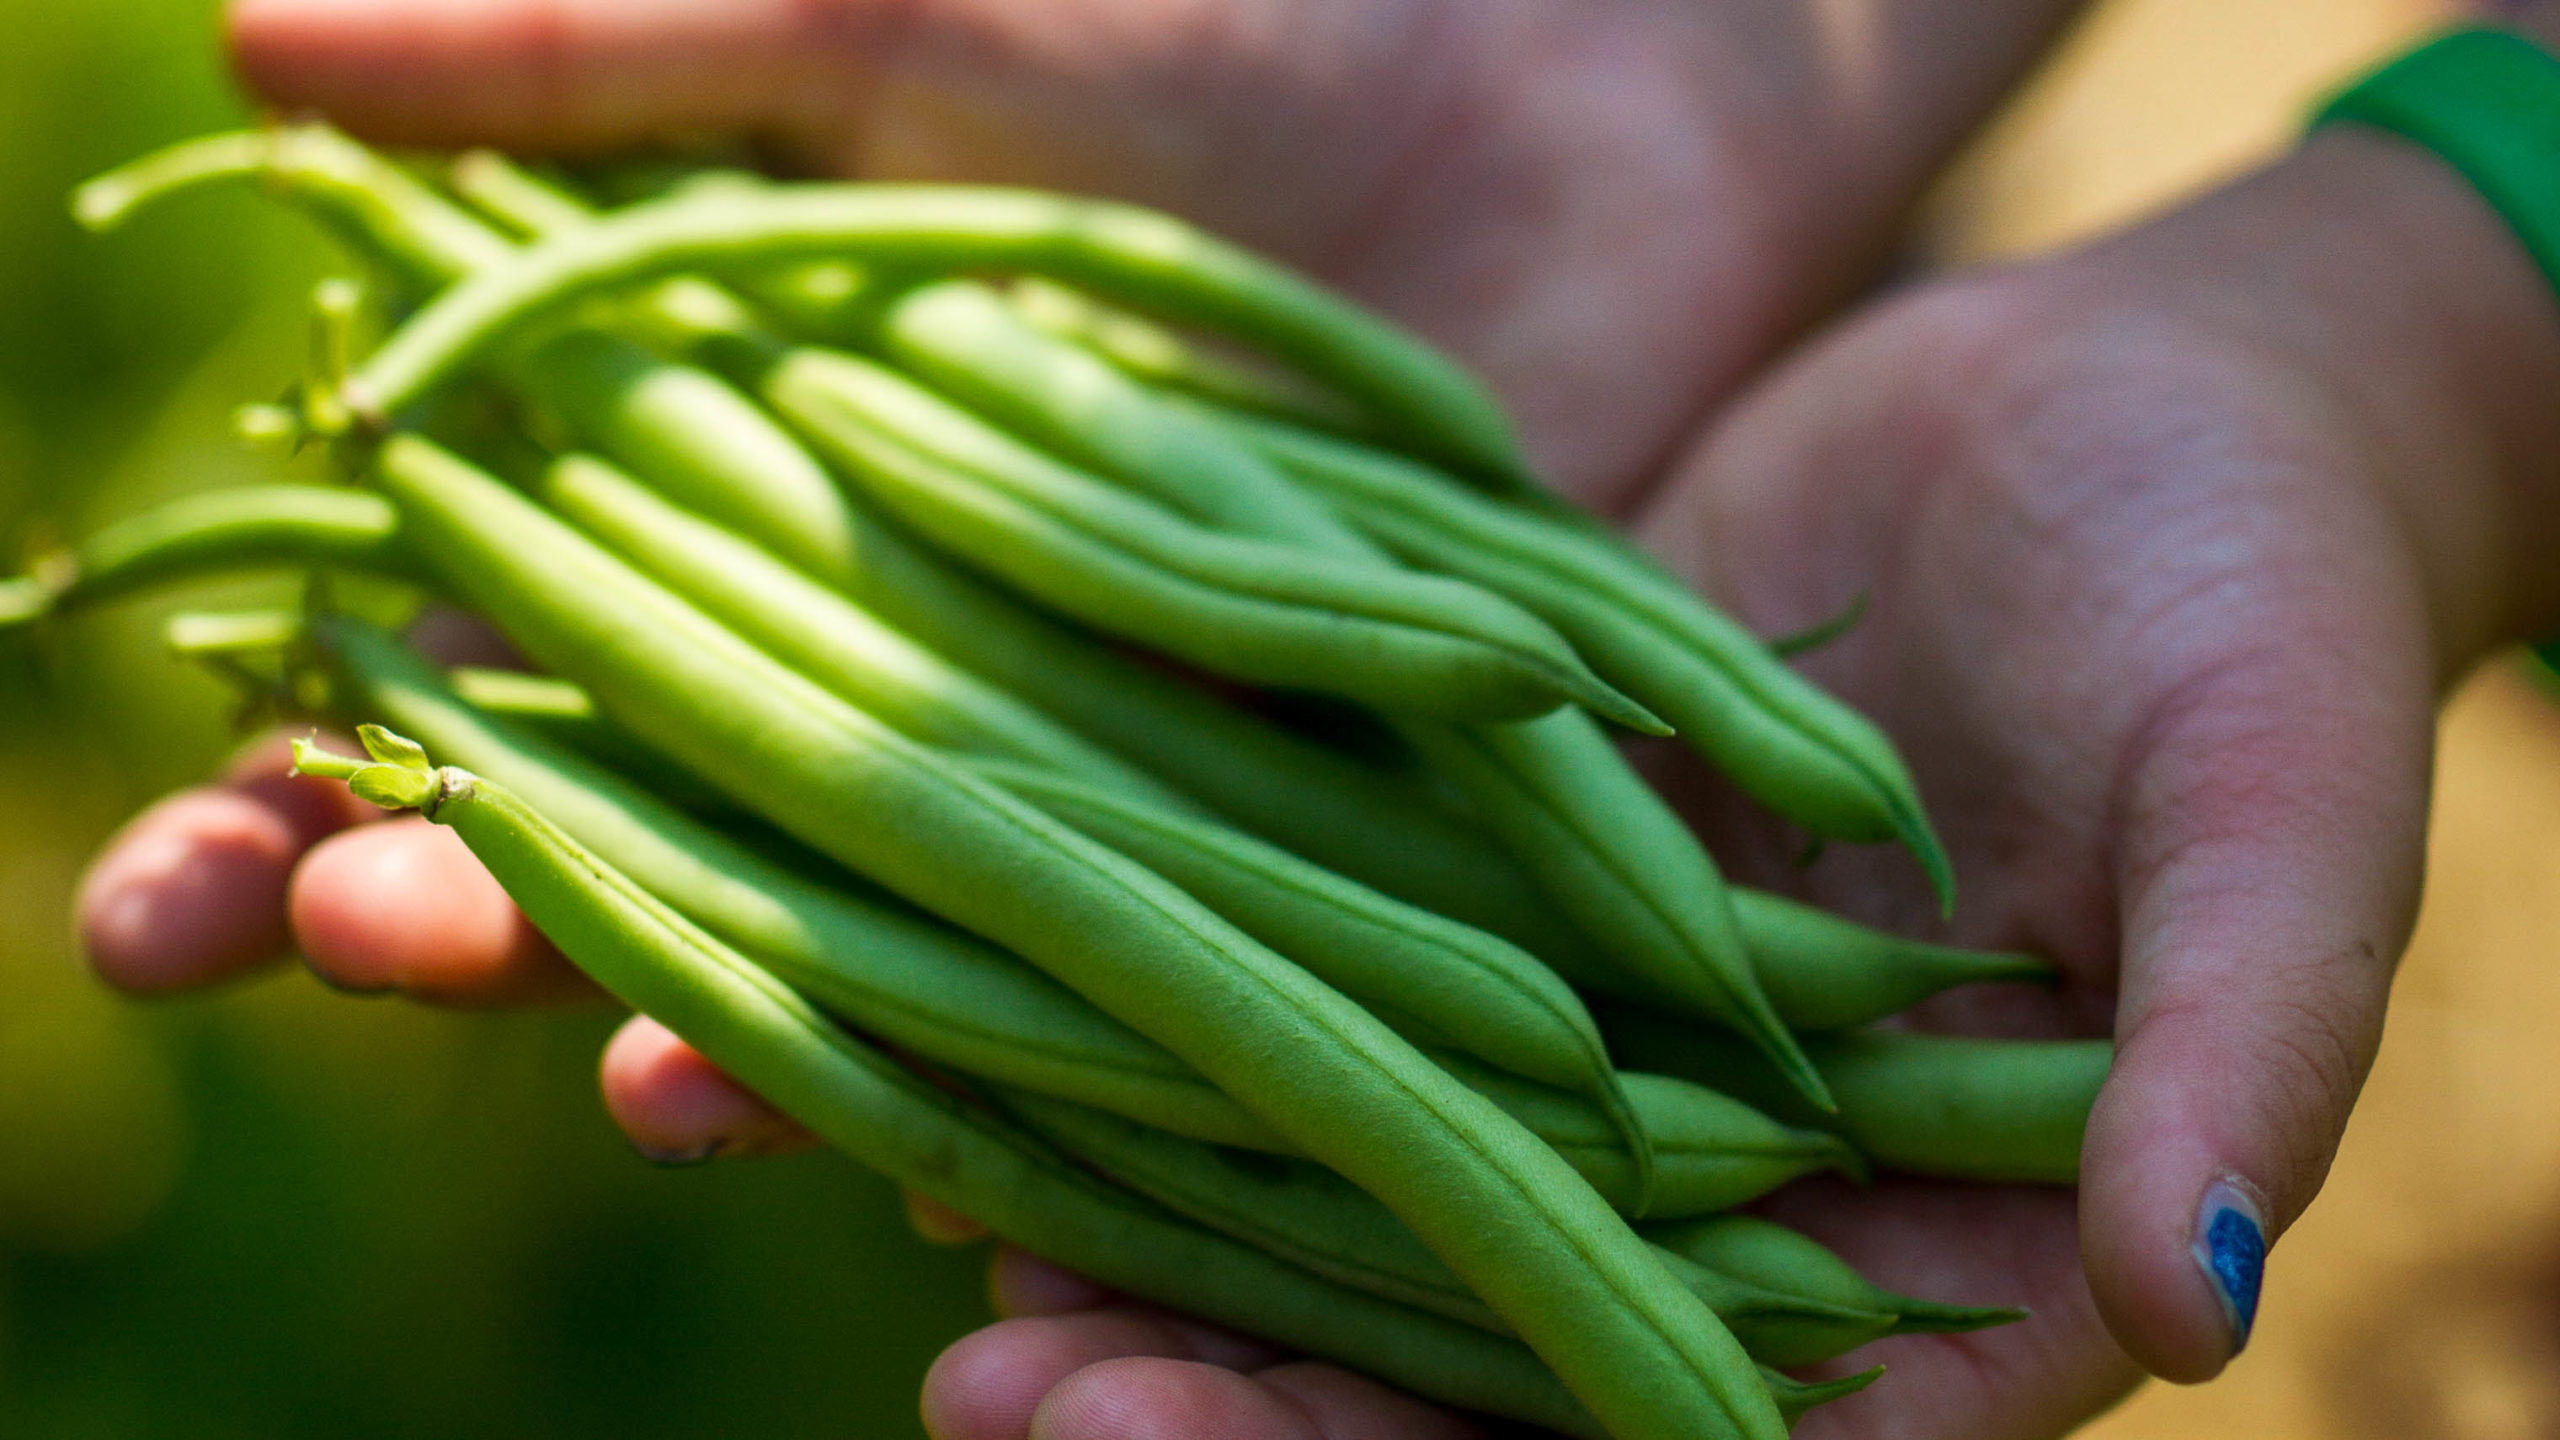 A camper holding a handful of green beans.